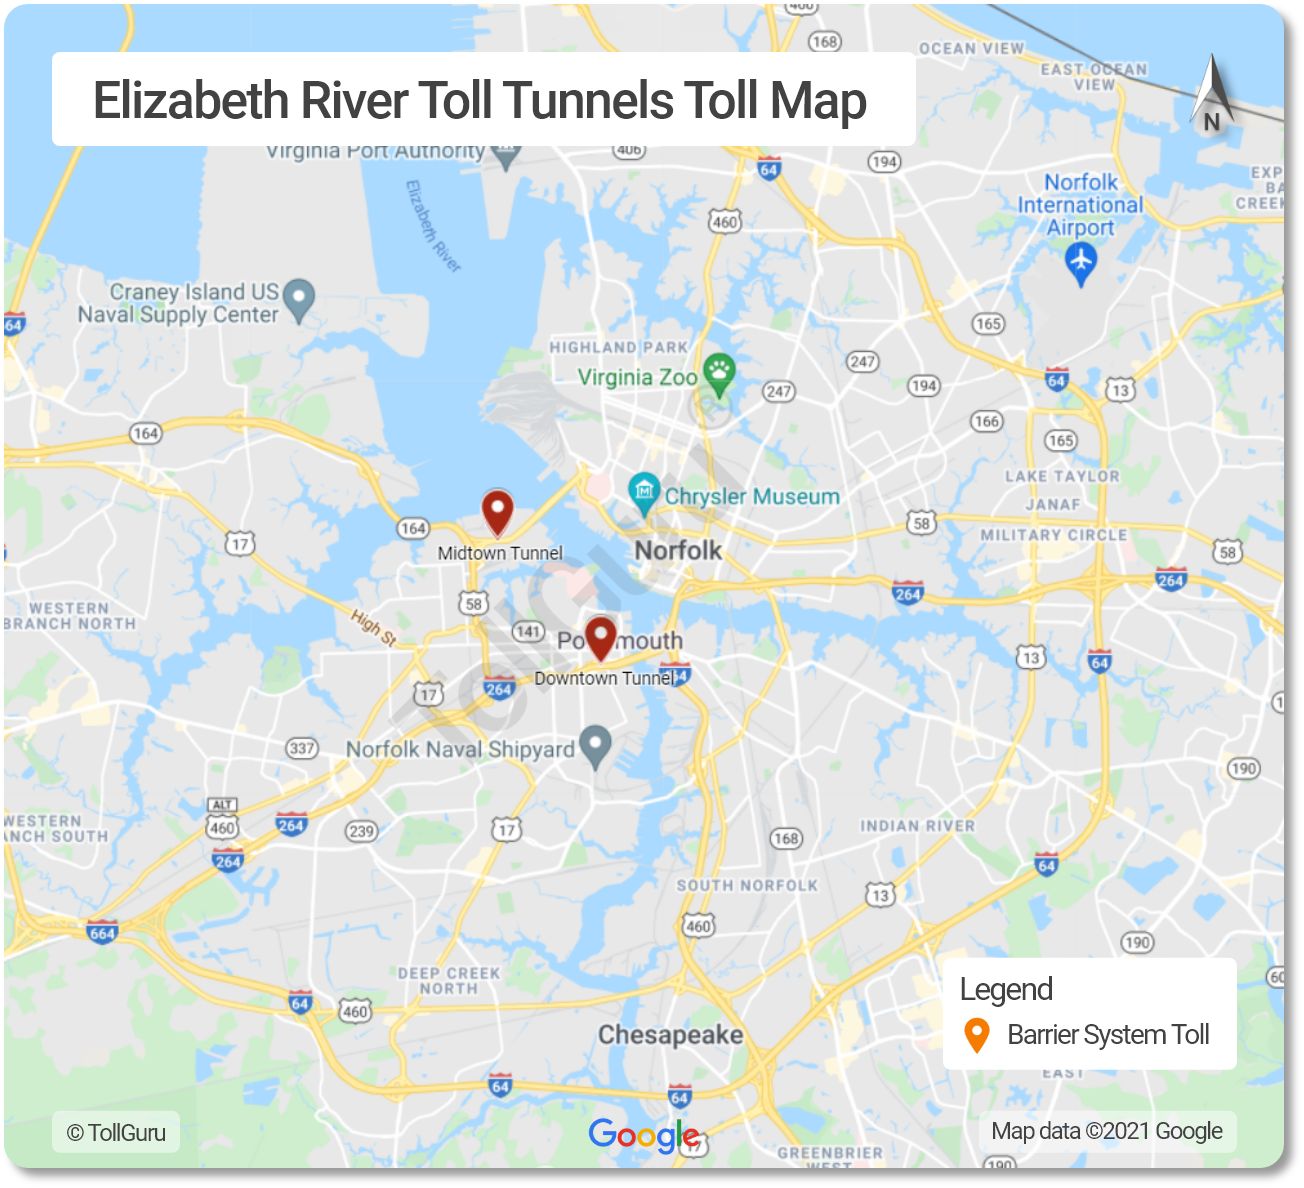 Toll booth locations on Elizabeth River Toll Tunnels consisting of Downtown and Midtown tunnels.